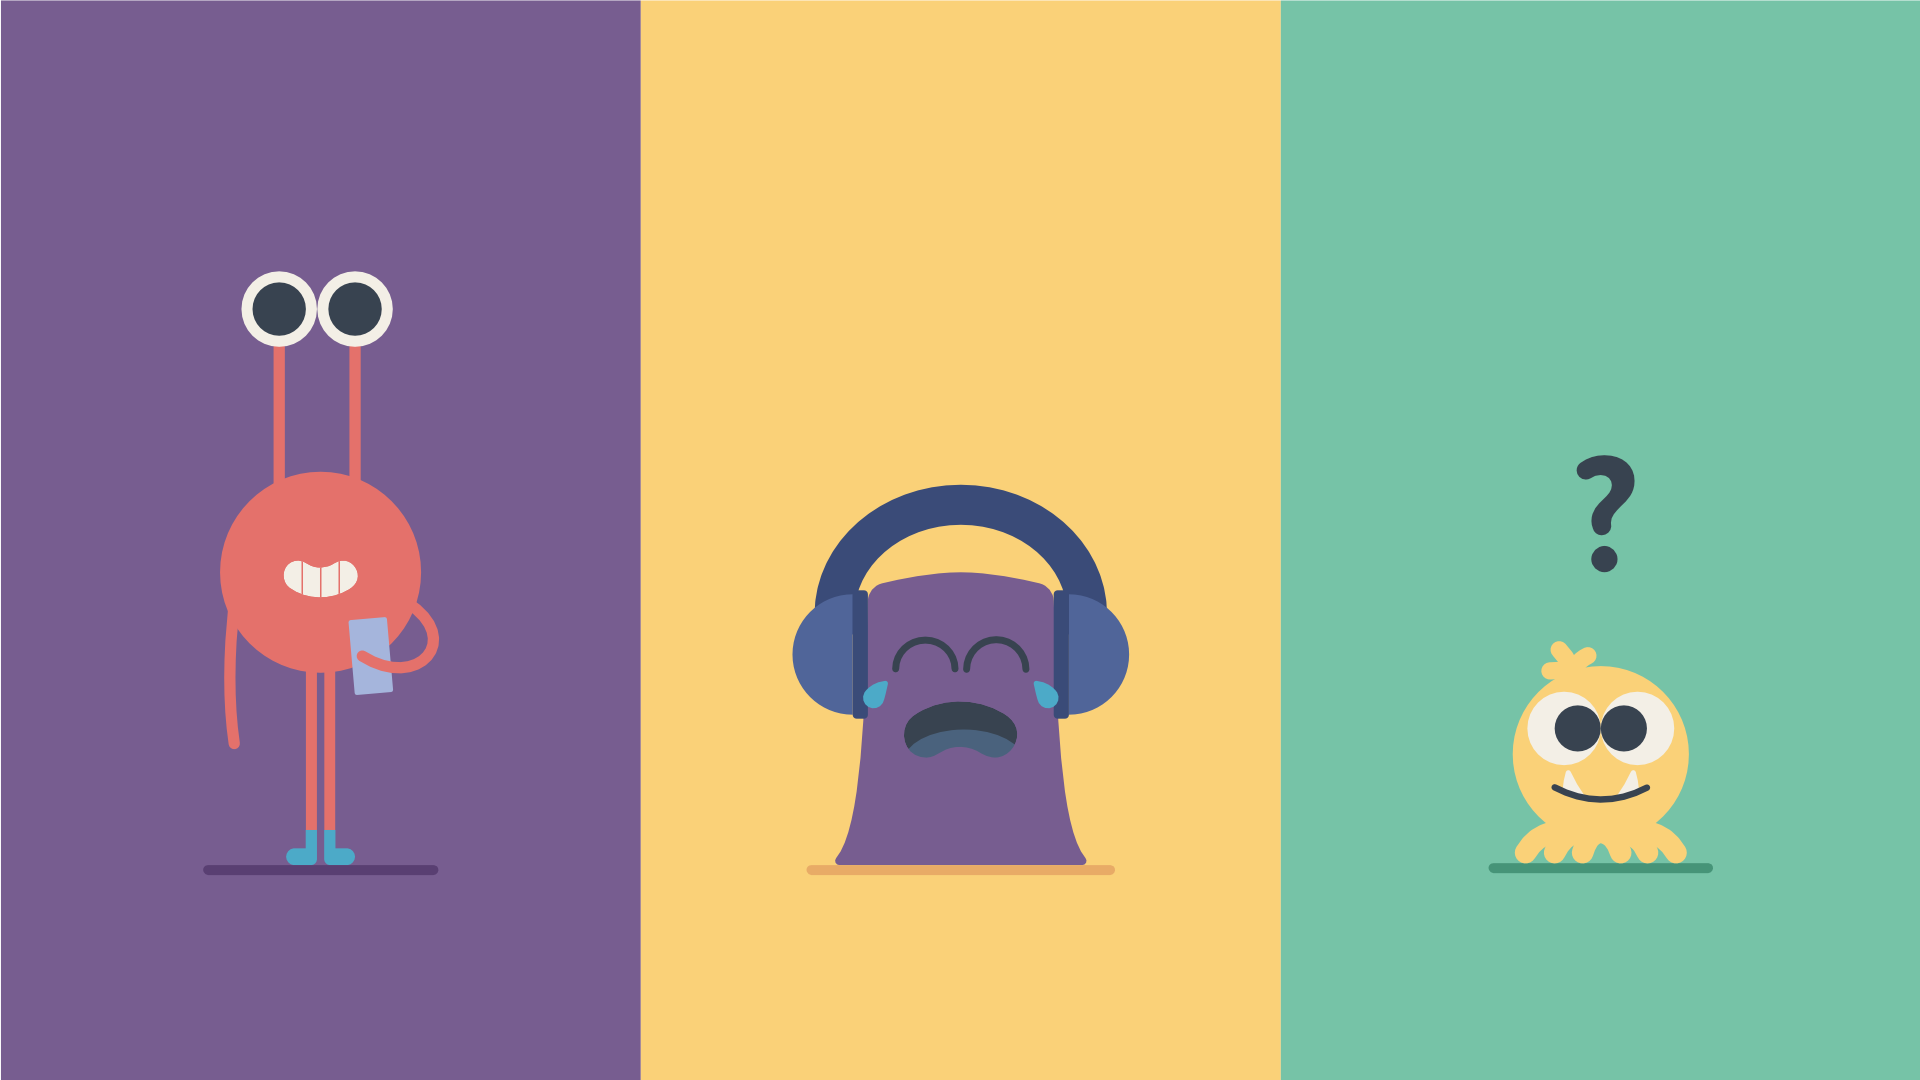 A 3-column grid of three monster characters. One is holding a phone, the second one is listening to music on headphones and crying, and the third has a question mark above its head.